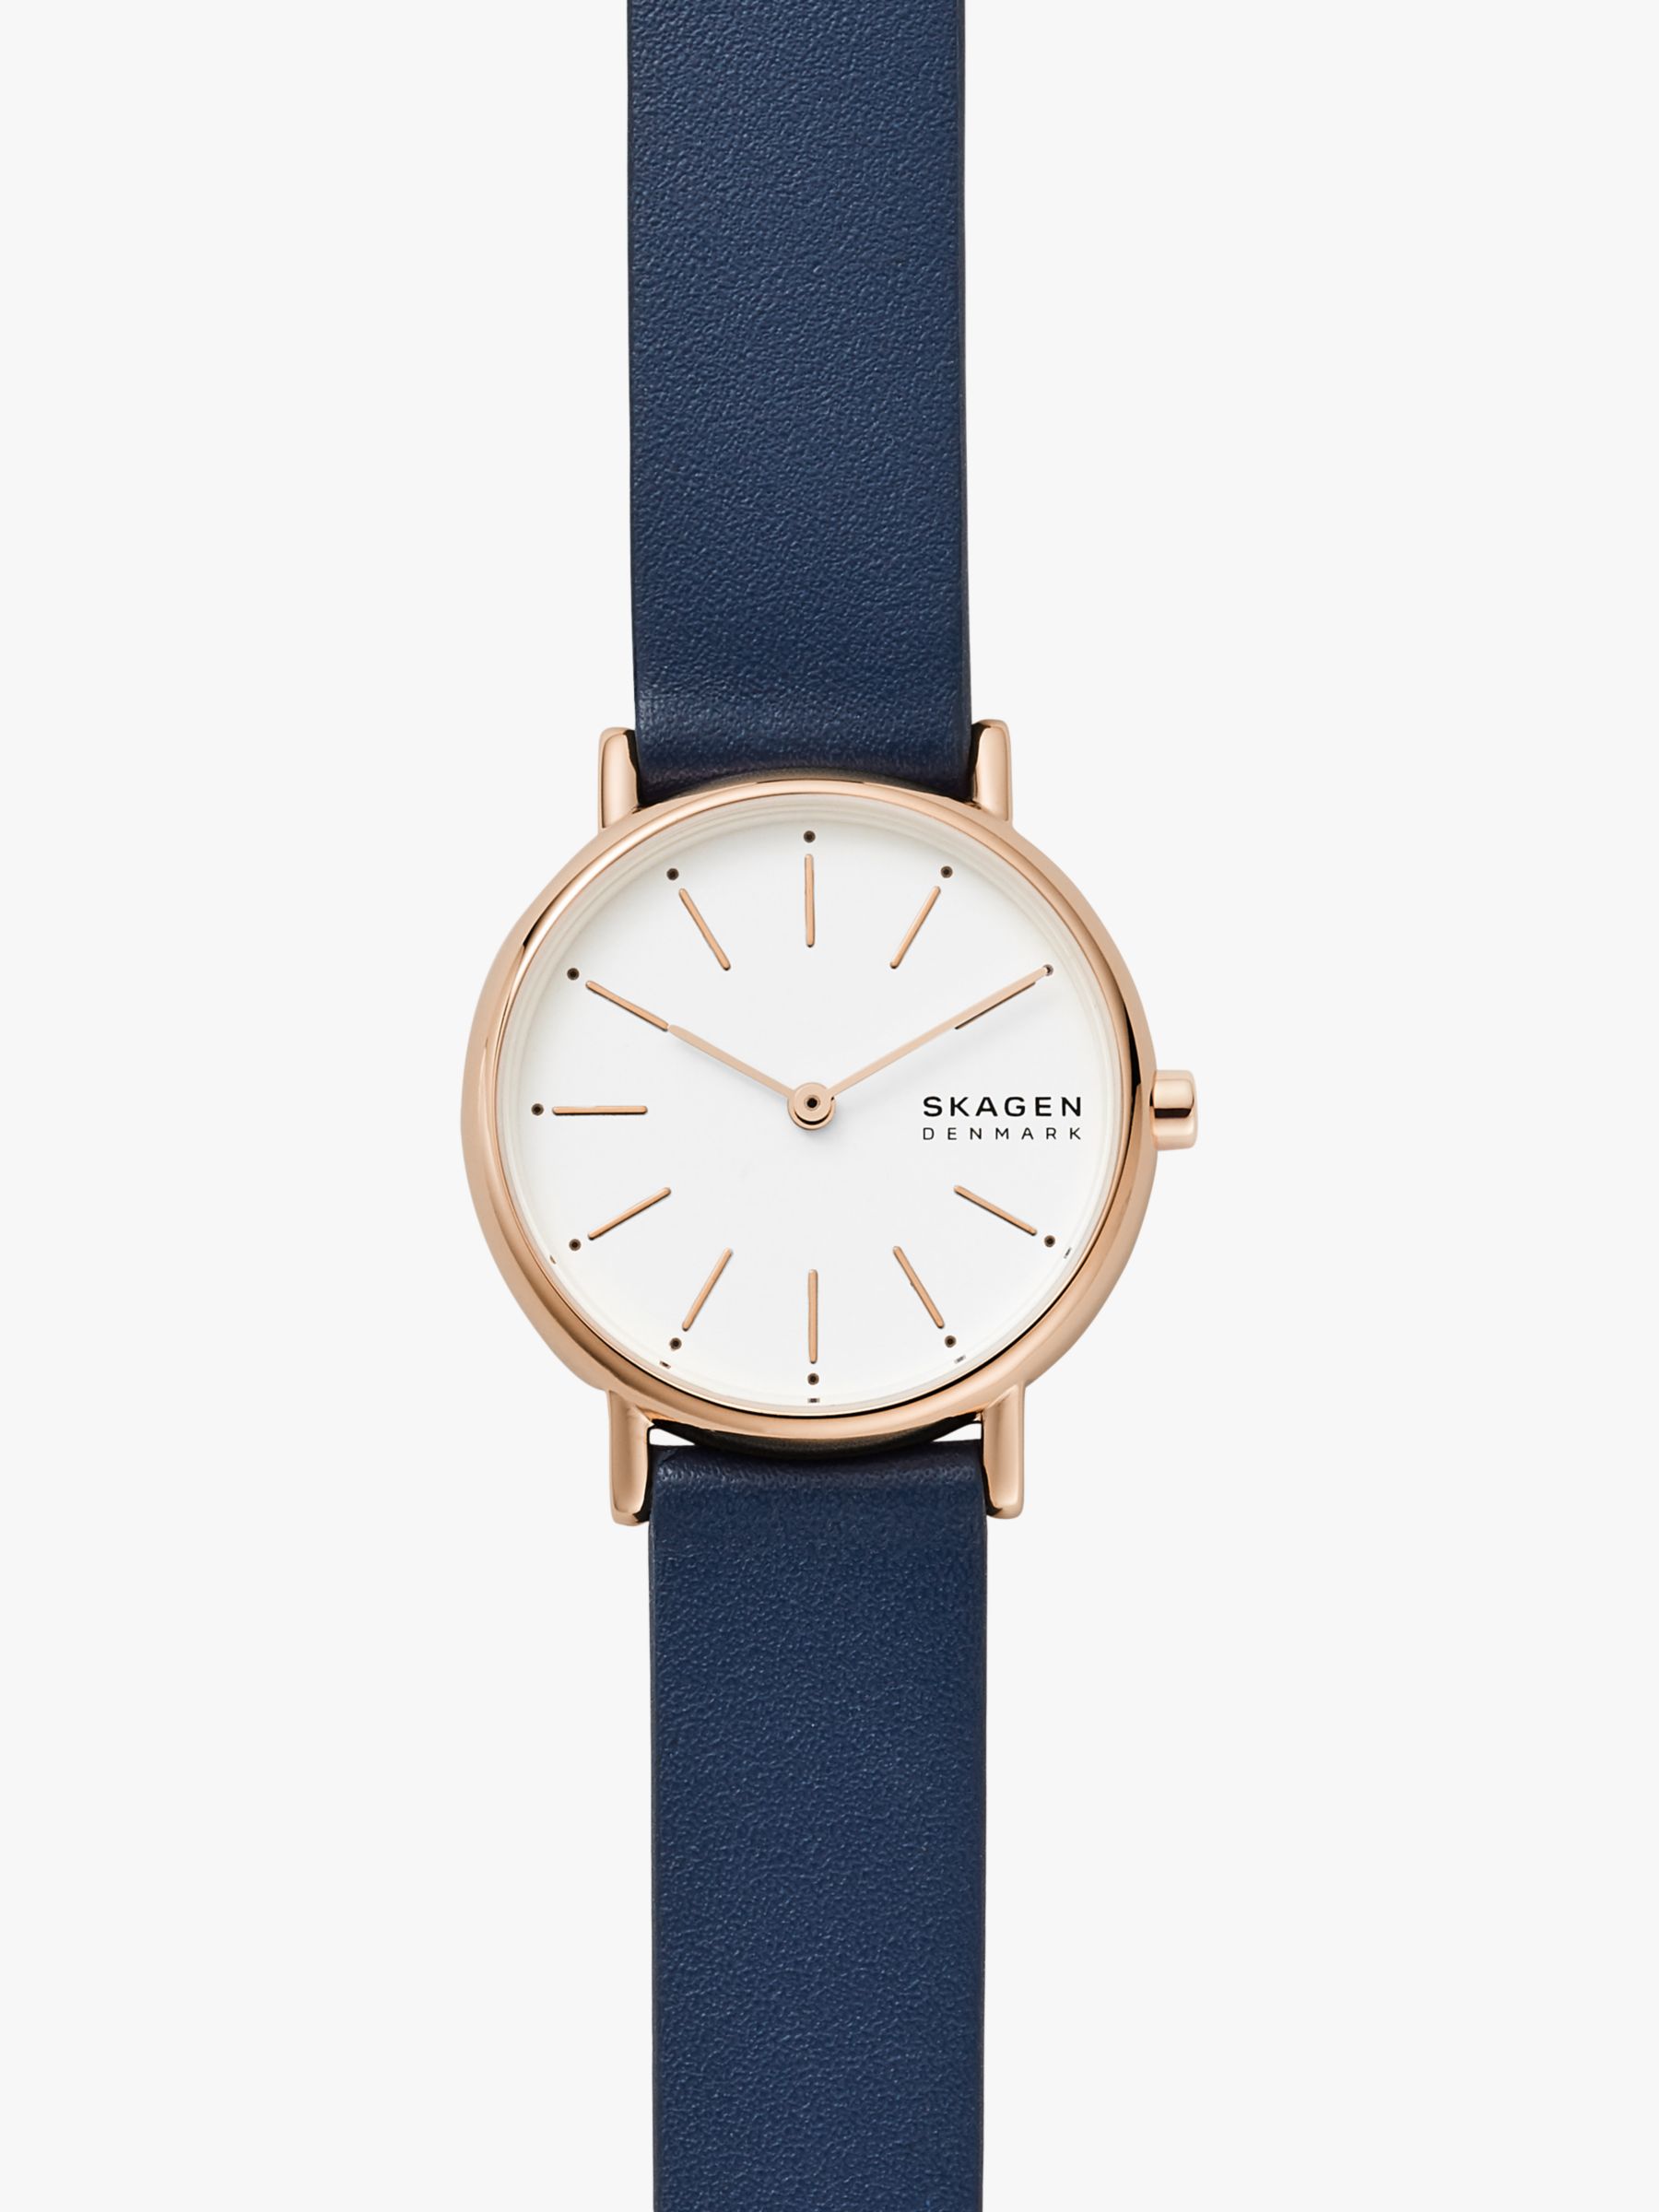 Skagen Women's Signatur Leather Watch, Blue/Rose Gold at Lewis & Partners